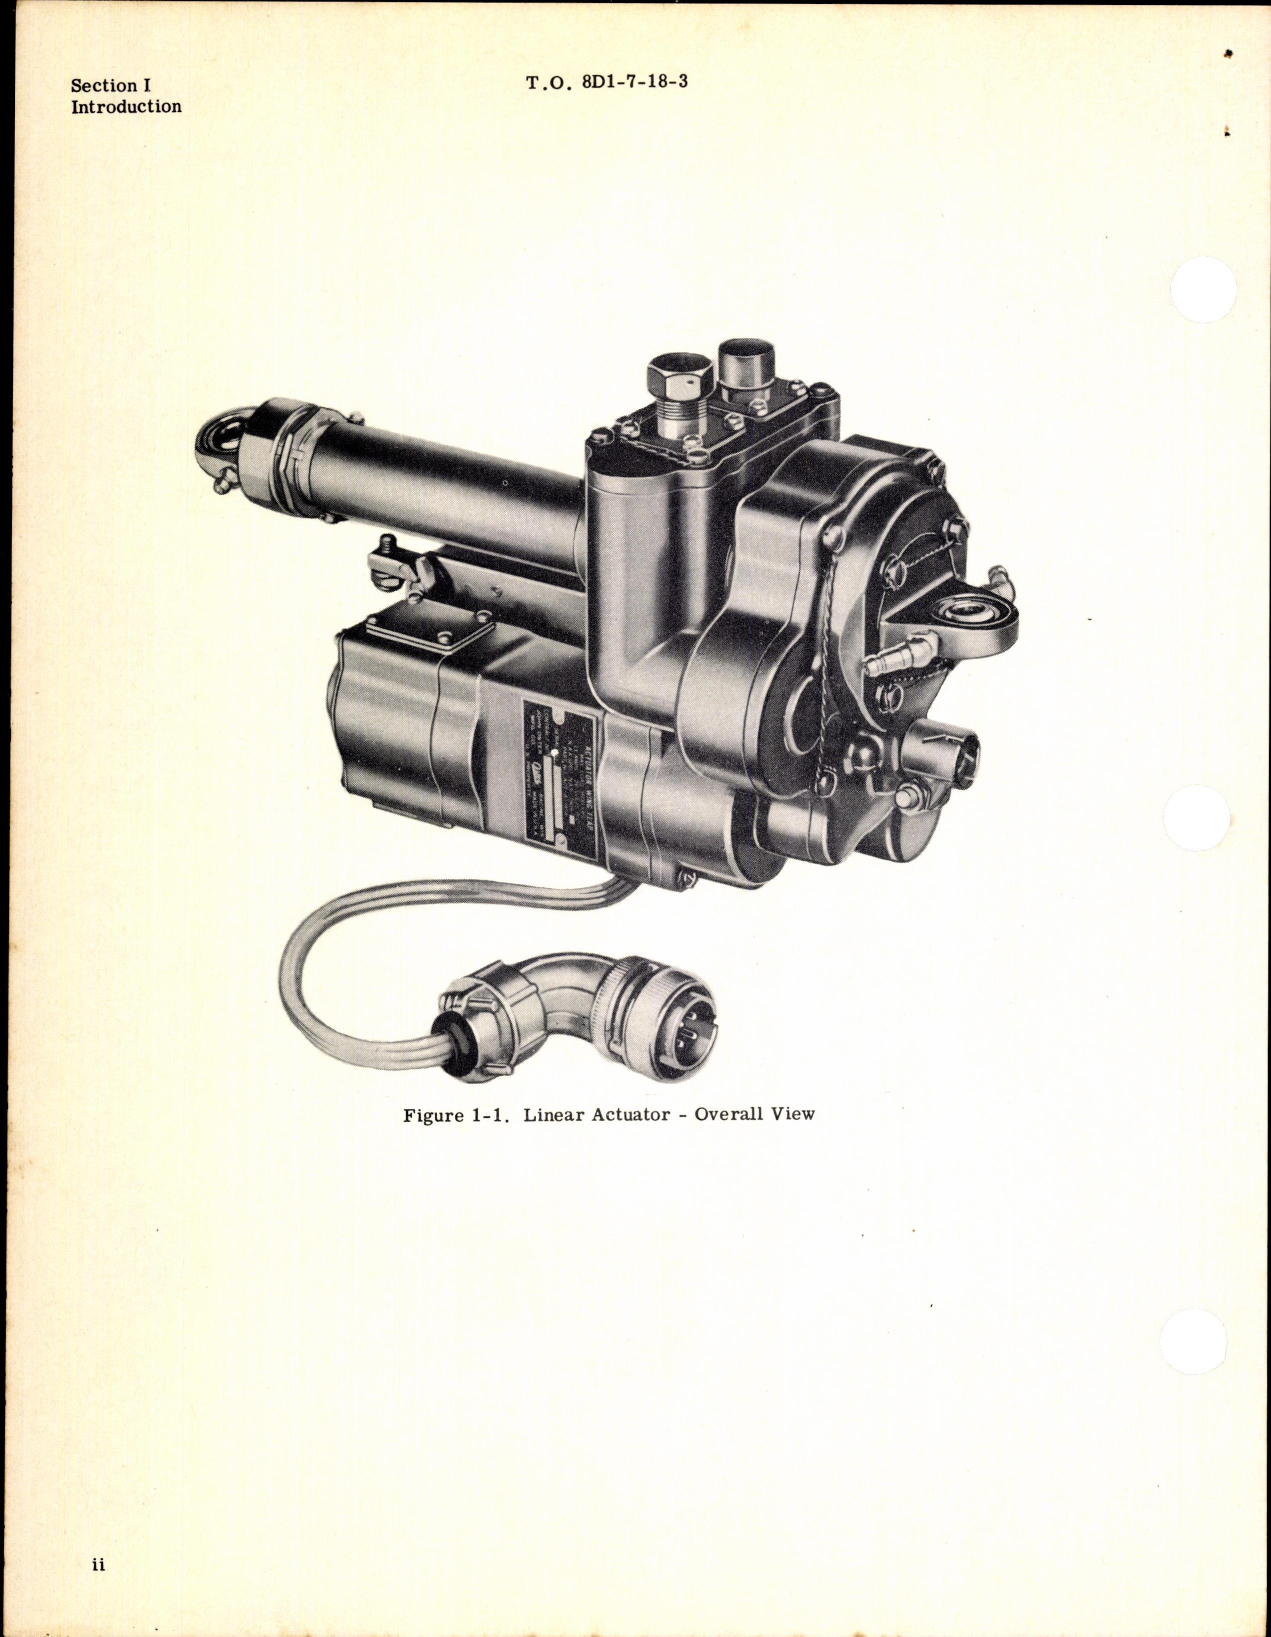 Sample page 4 from AirCorps Library document: Linear Actuator Model ACT-A-1954-1